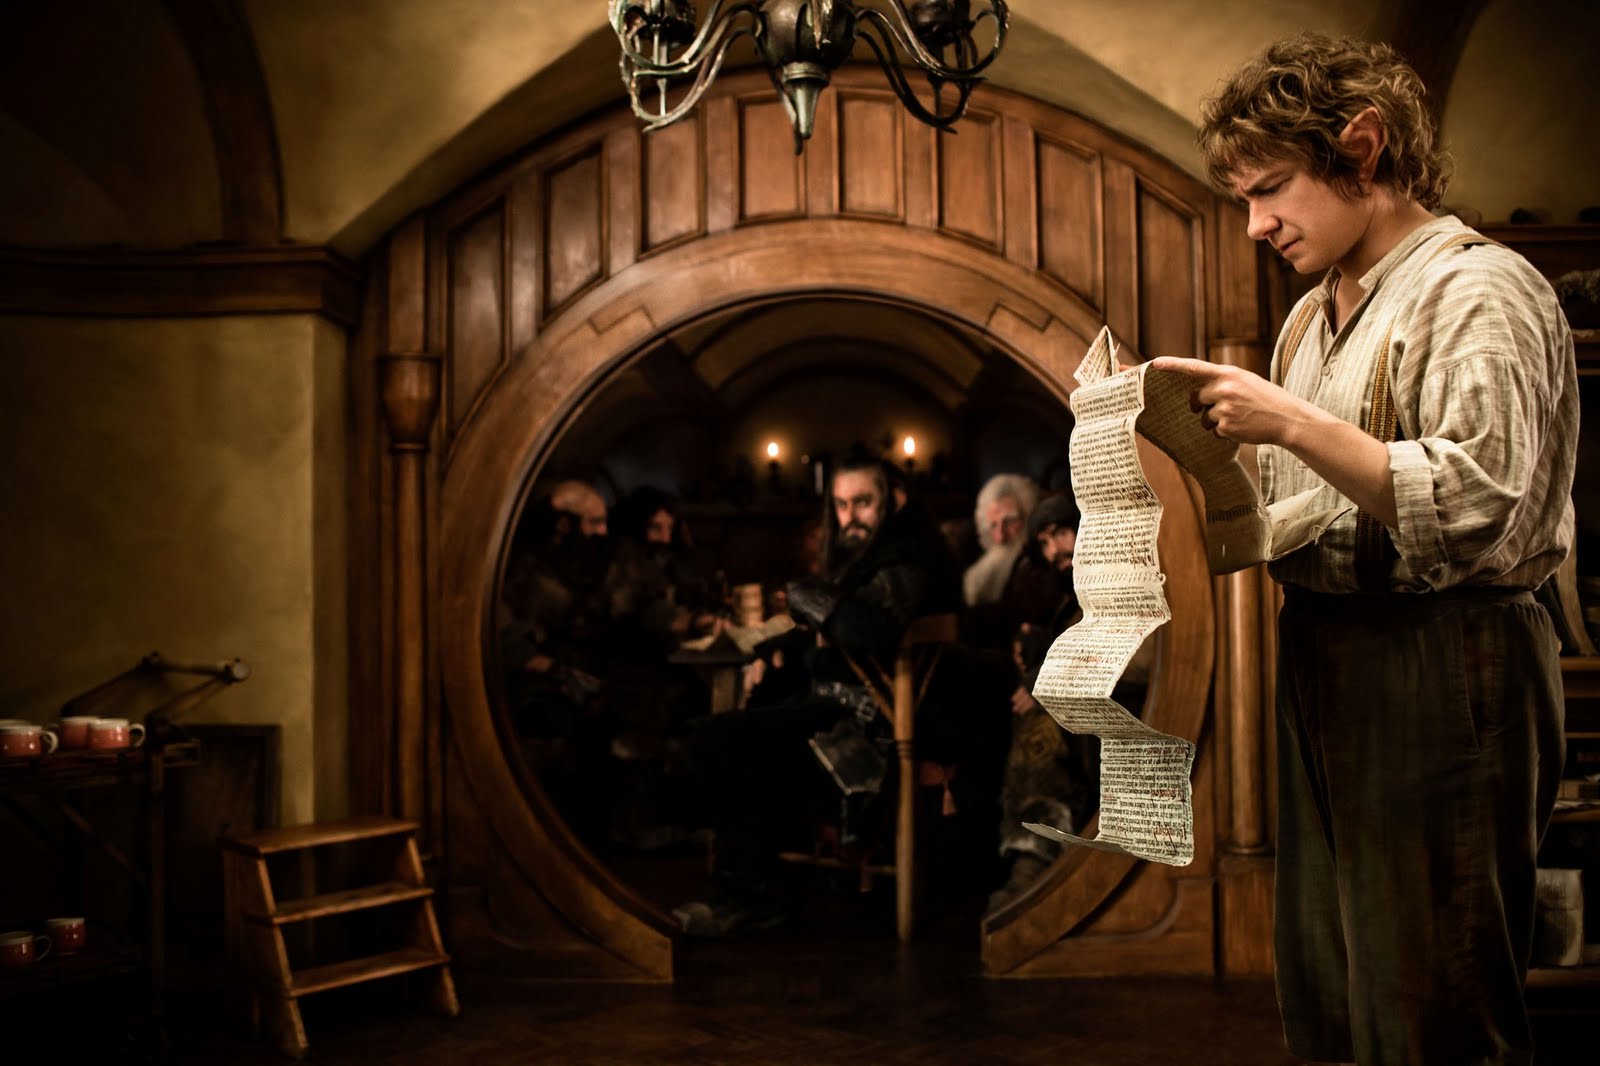 Trend Watch: ‘The Hobbit’ Sparks New Interest in Wood Interiors